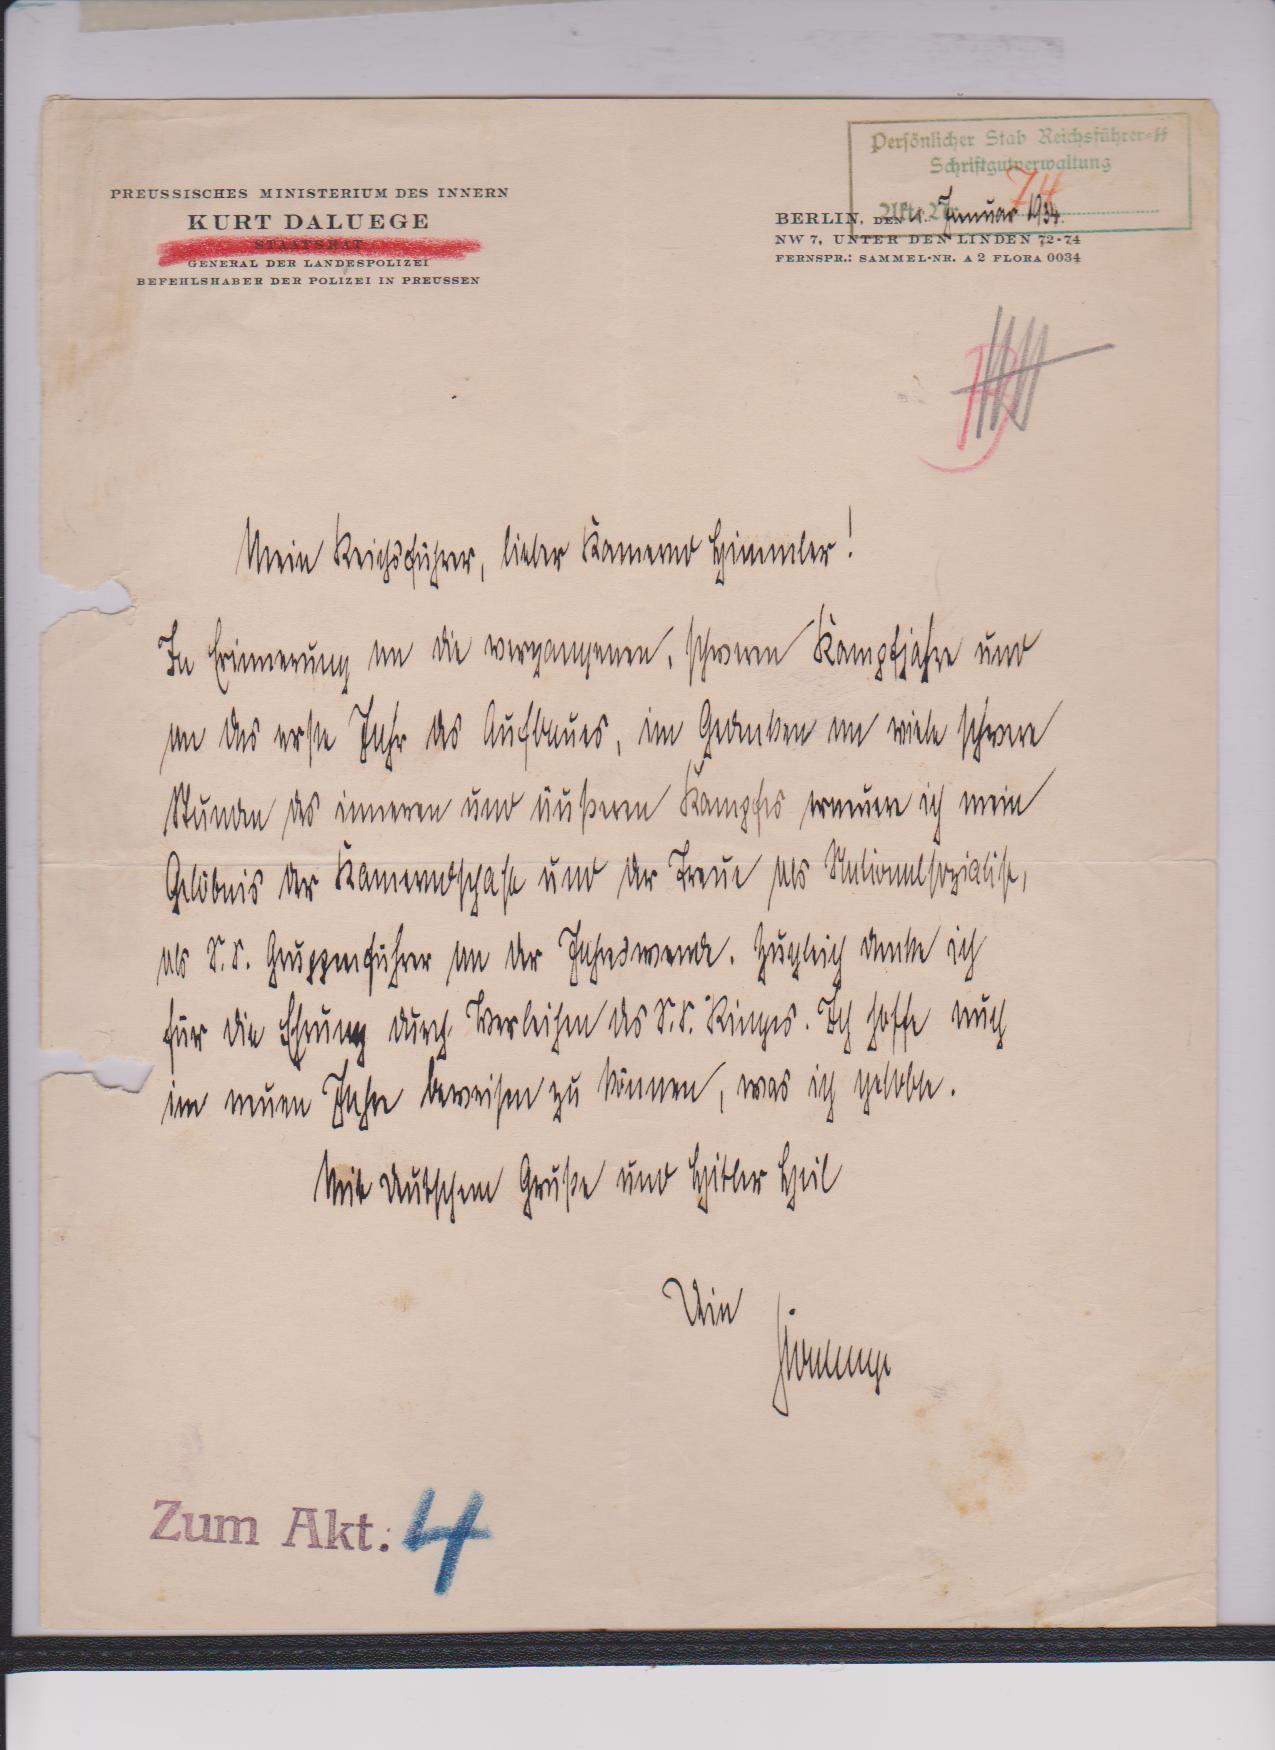 Series of letters from Himmler to Kurt Daluege